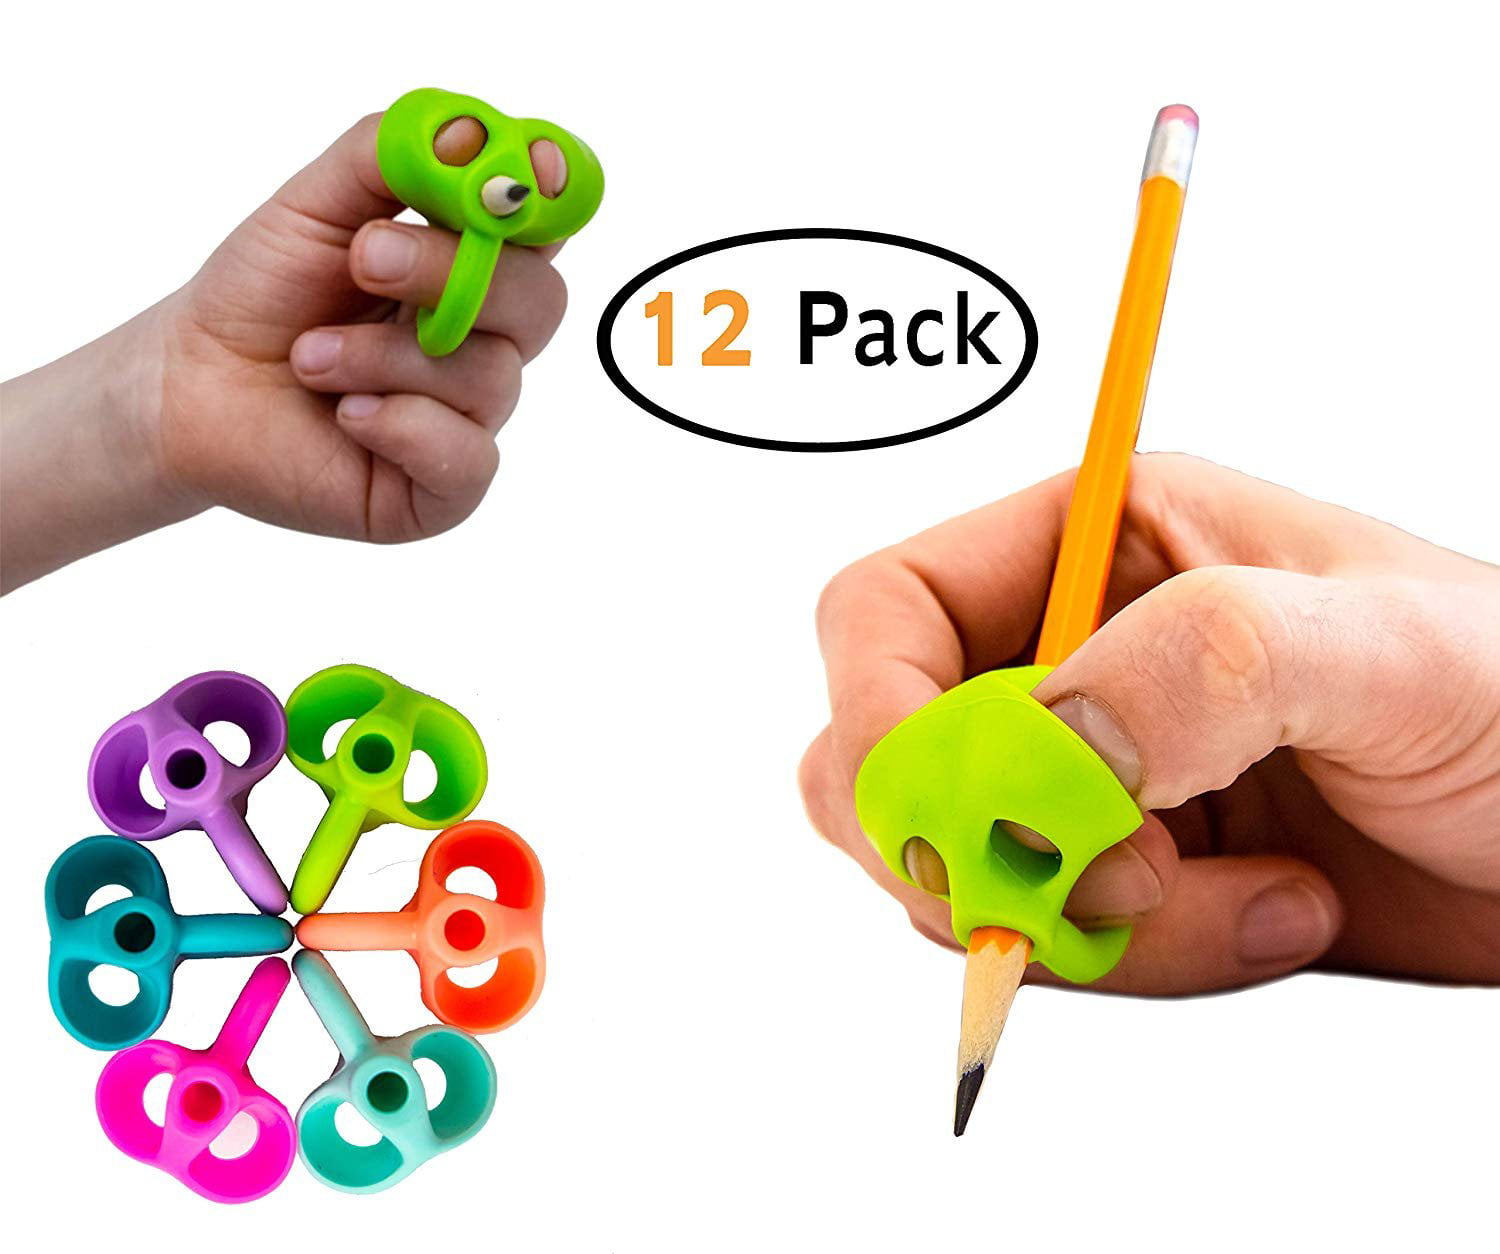 Soft Silcone Training Grip with Assorted Colors Pack of 5 by AUTEMOJO Toddlers 2-4 Years Pencil Grips for Kids Handwriting Left Handed